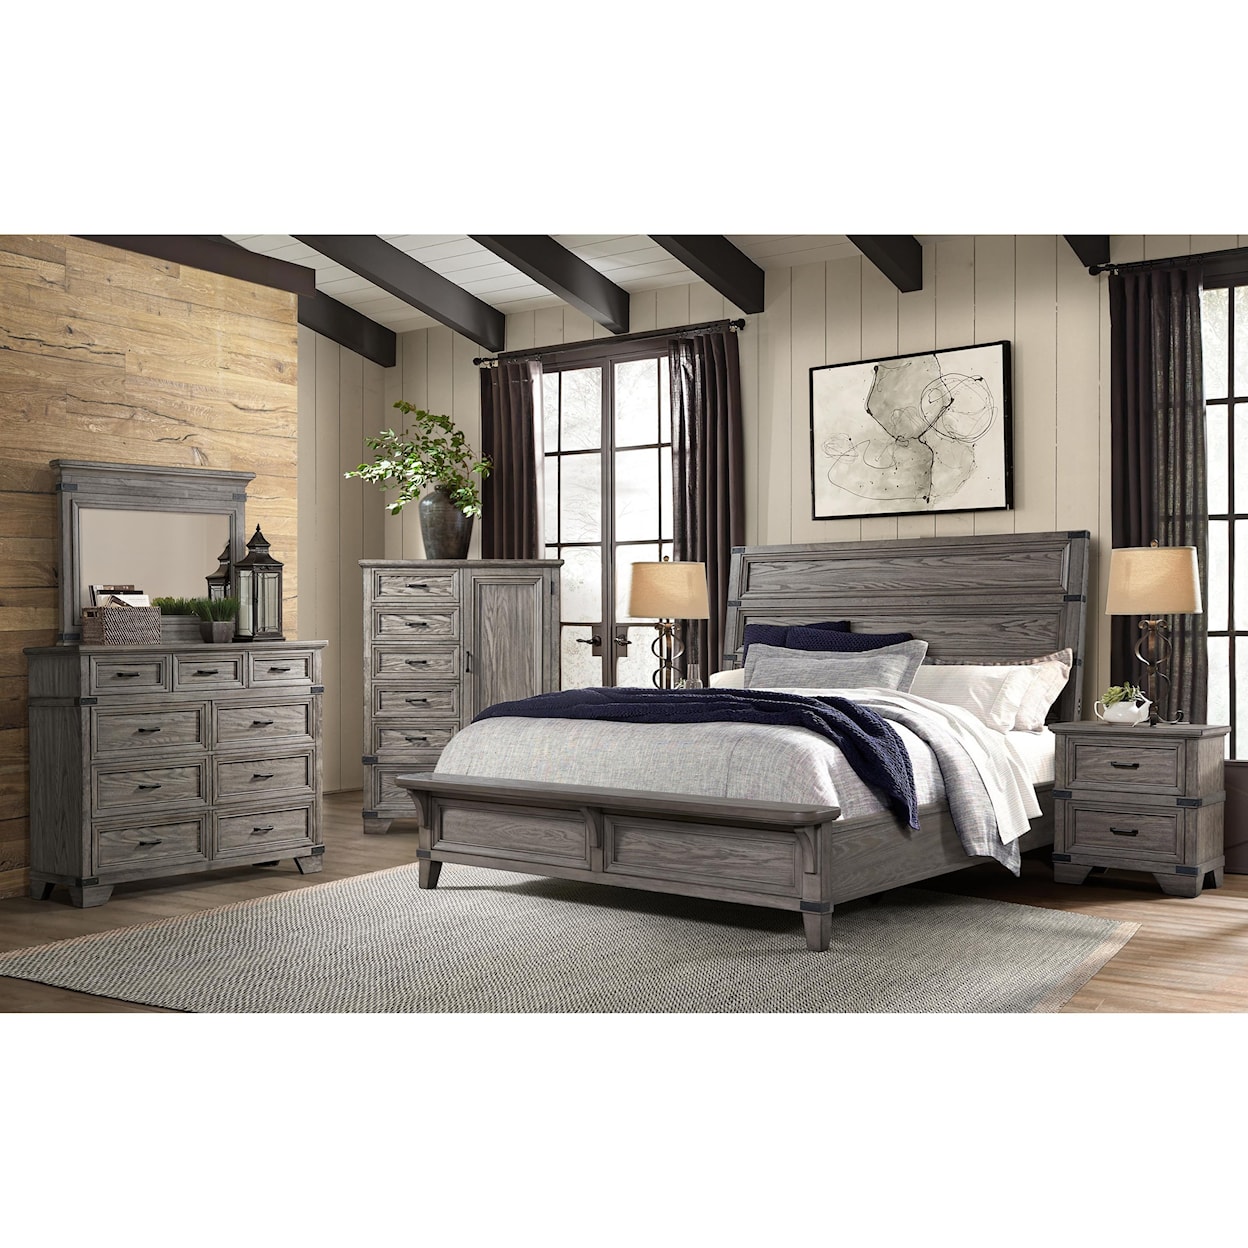 Intercon Forge California King Bedroom Group